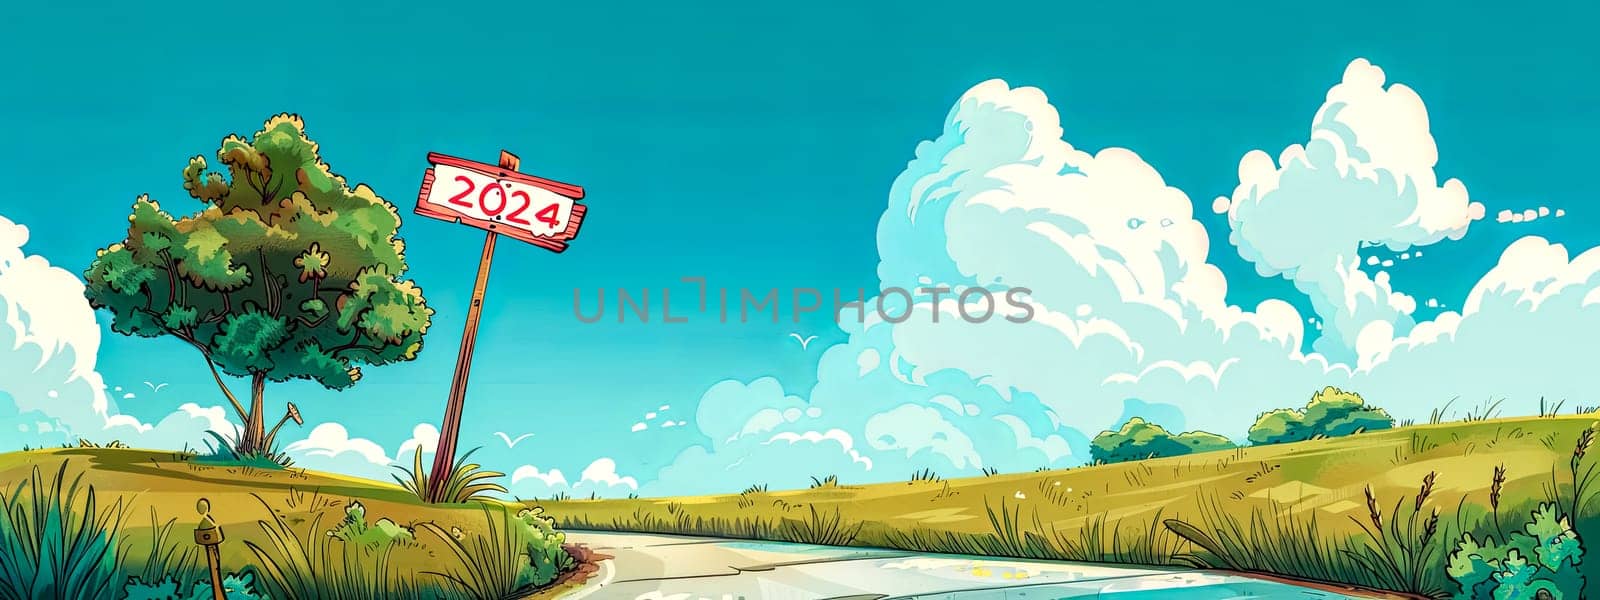 2024 new year conceptual landscape illustration with scenic road signpost and beautiful artistic cartoon nature countryside in tranquil peaceful holiday celebration of change and progress